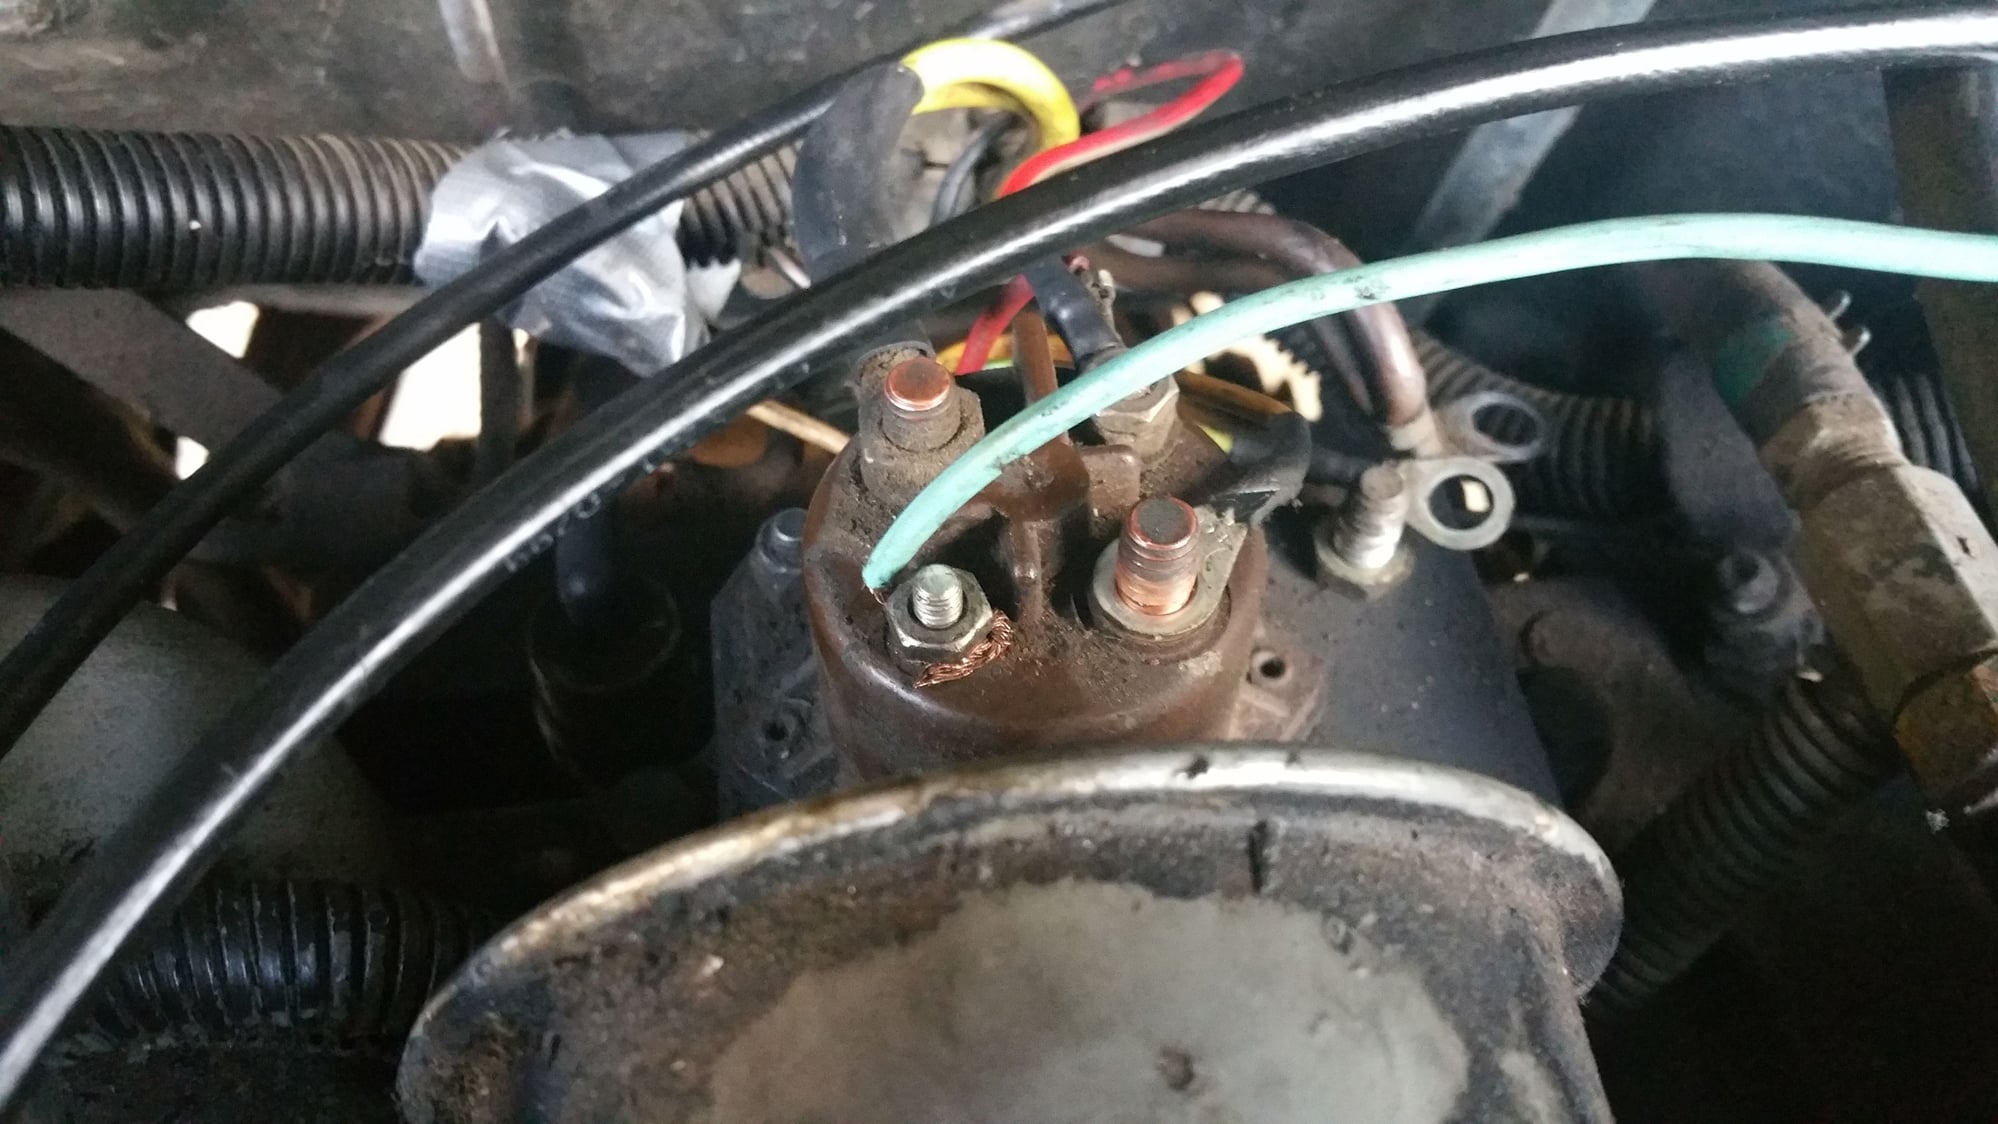 Help with glow plug manual by pass wiring - Ford Truck Enthusiasts Forums 6.2 Diesel Manual Glow Plug Conversion